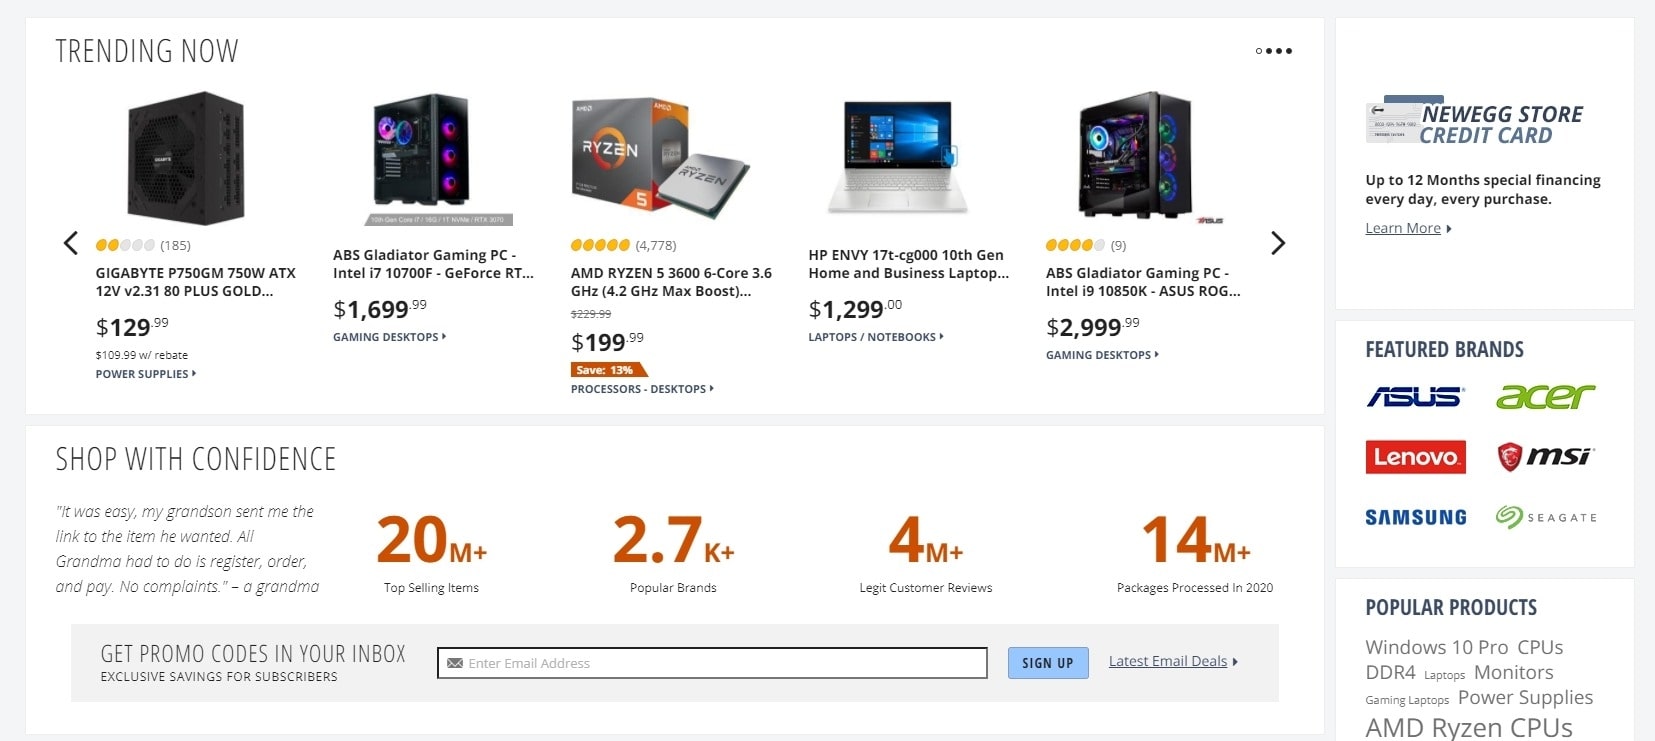 Newegg pros and cons